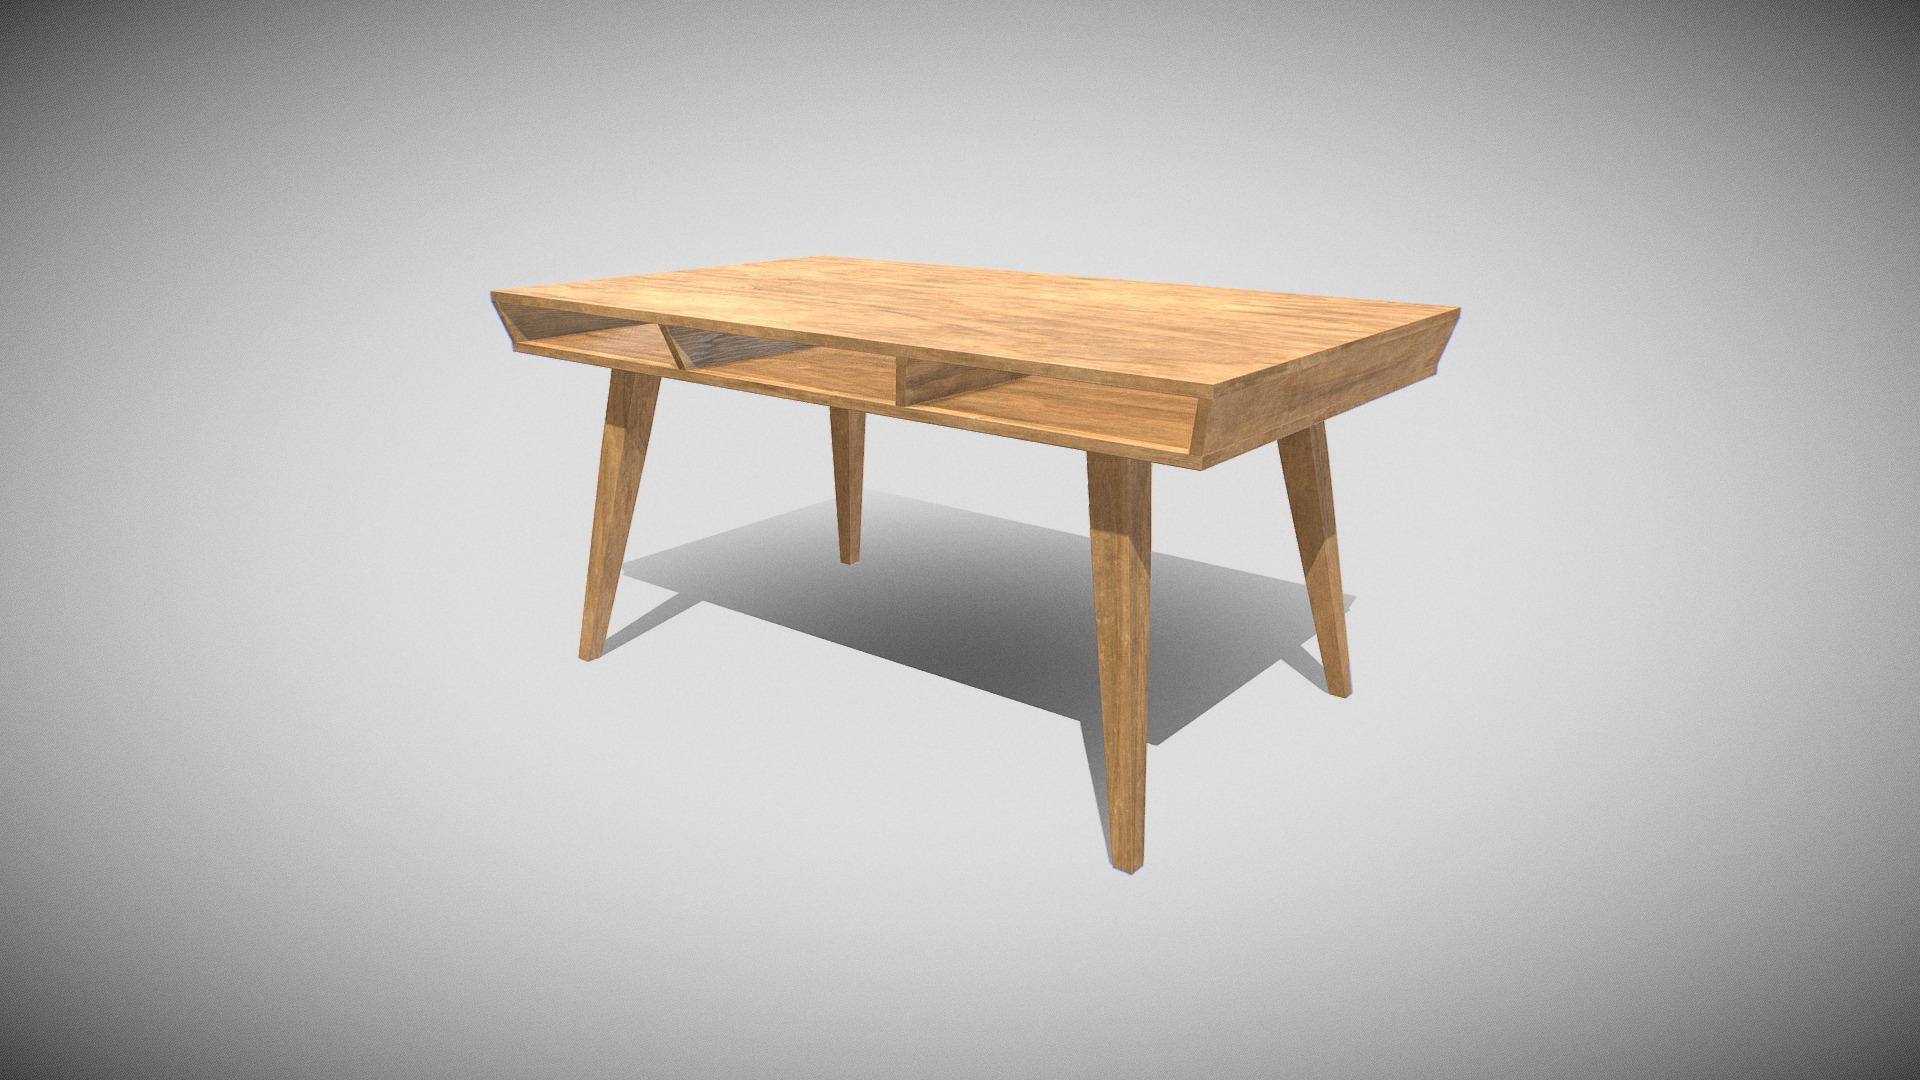 3D model Table 1 - This is a 3D model of the Table 1. The 3D model is about a wooden table on a white background.